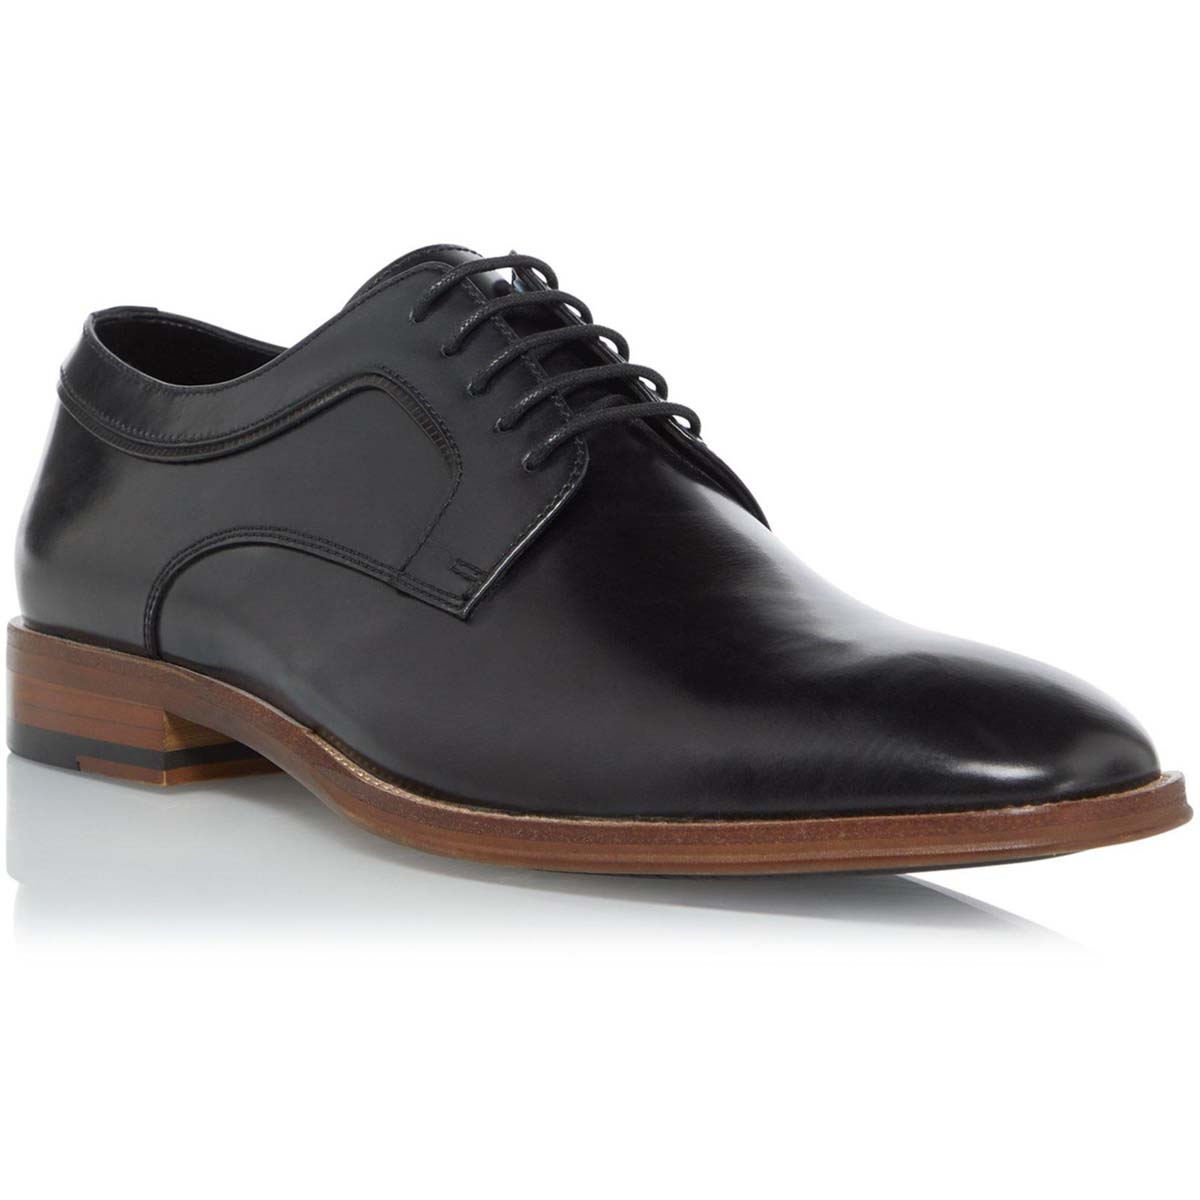 Dune London Sparrows Black Mens formal shoes 2775095201654 in a Plain Leather in Size 12